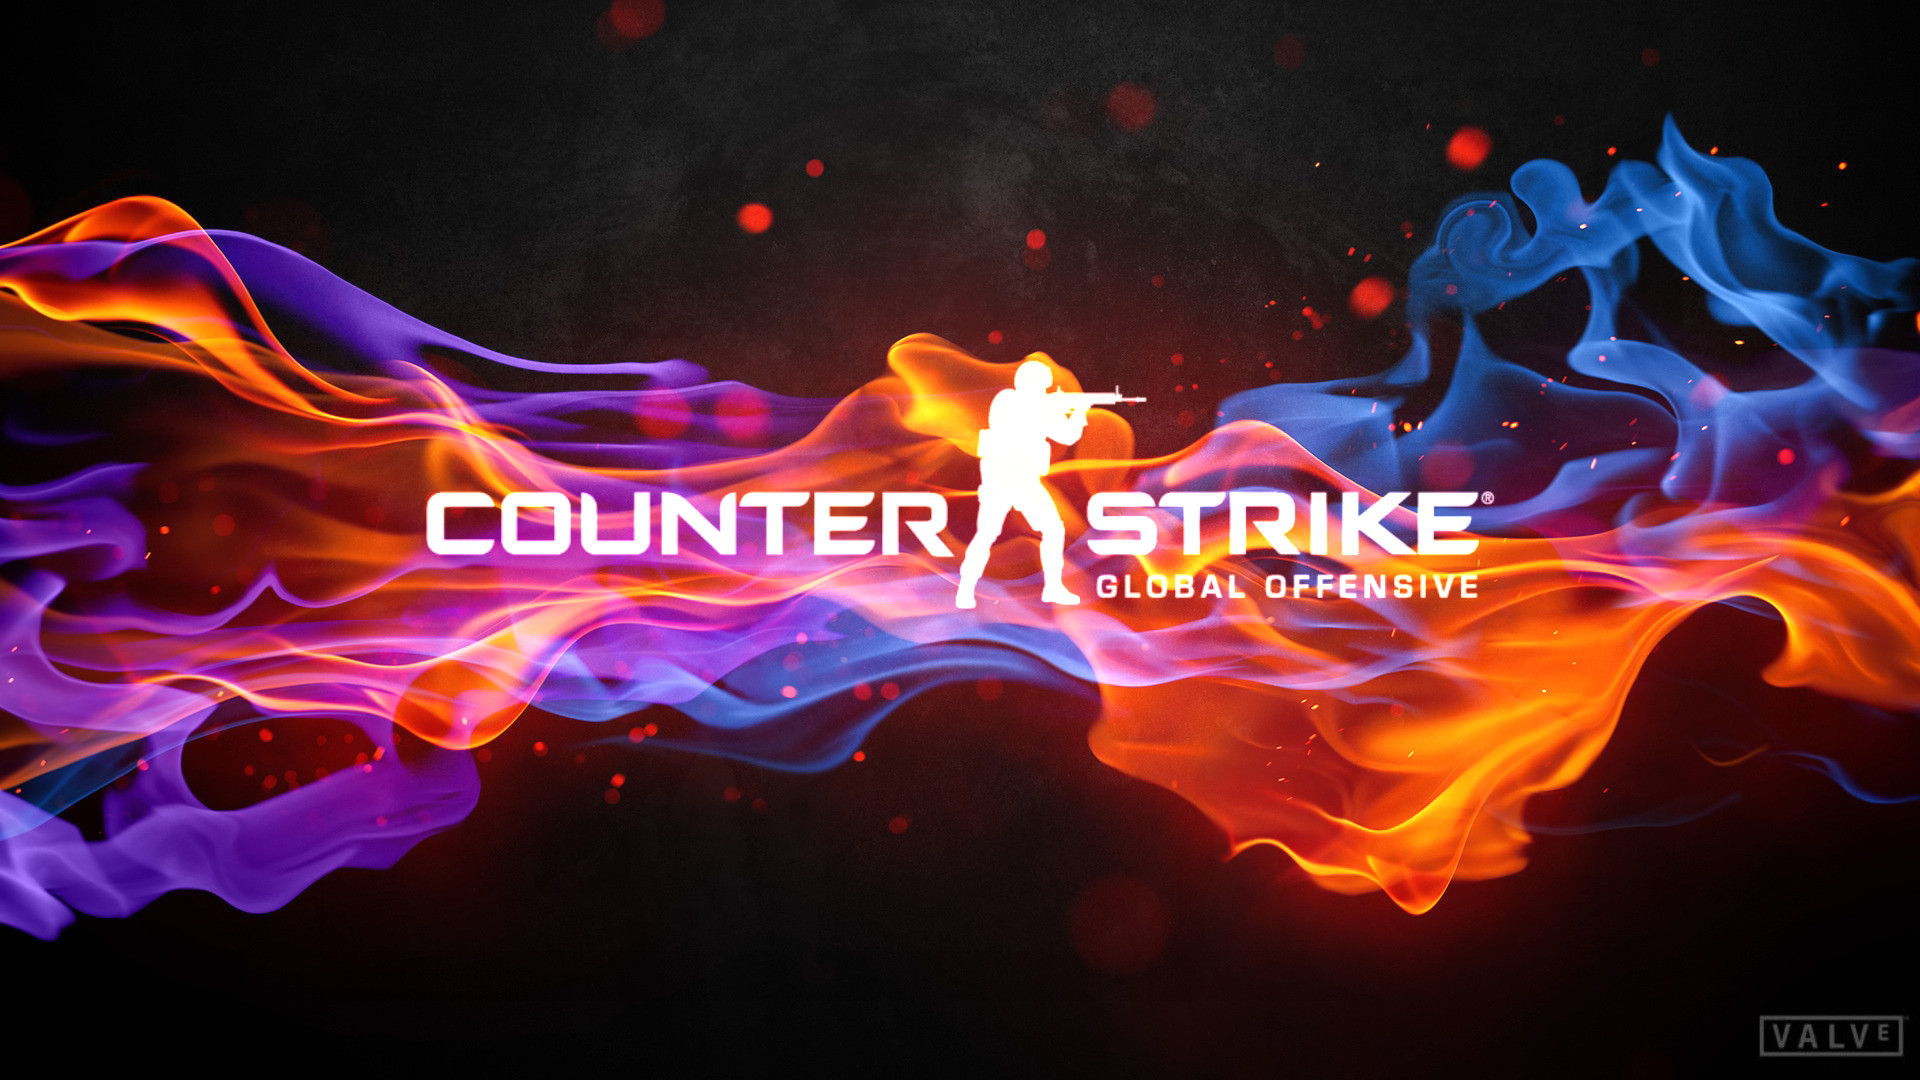 Cs Go Wallpapers 1920x1080 83 Images HD Wallpapers Download Free Images Wallpaper [wallpaper981.blogspot.com]